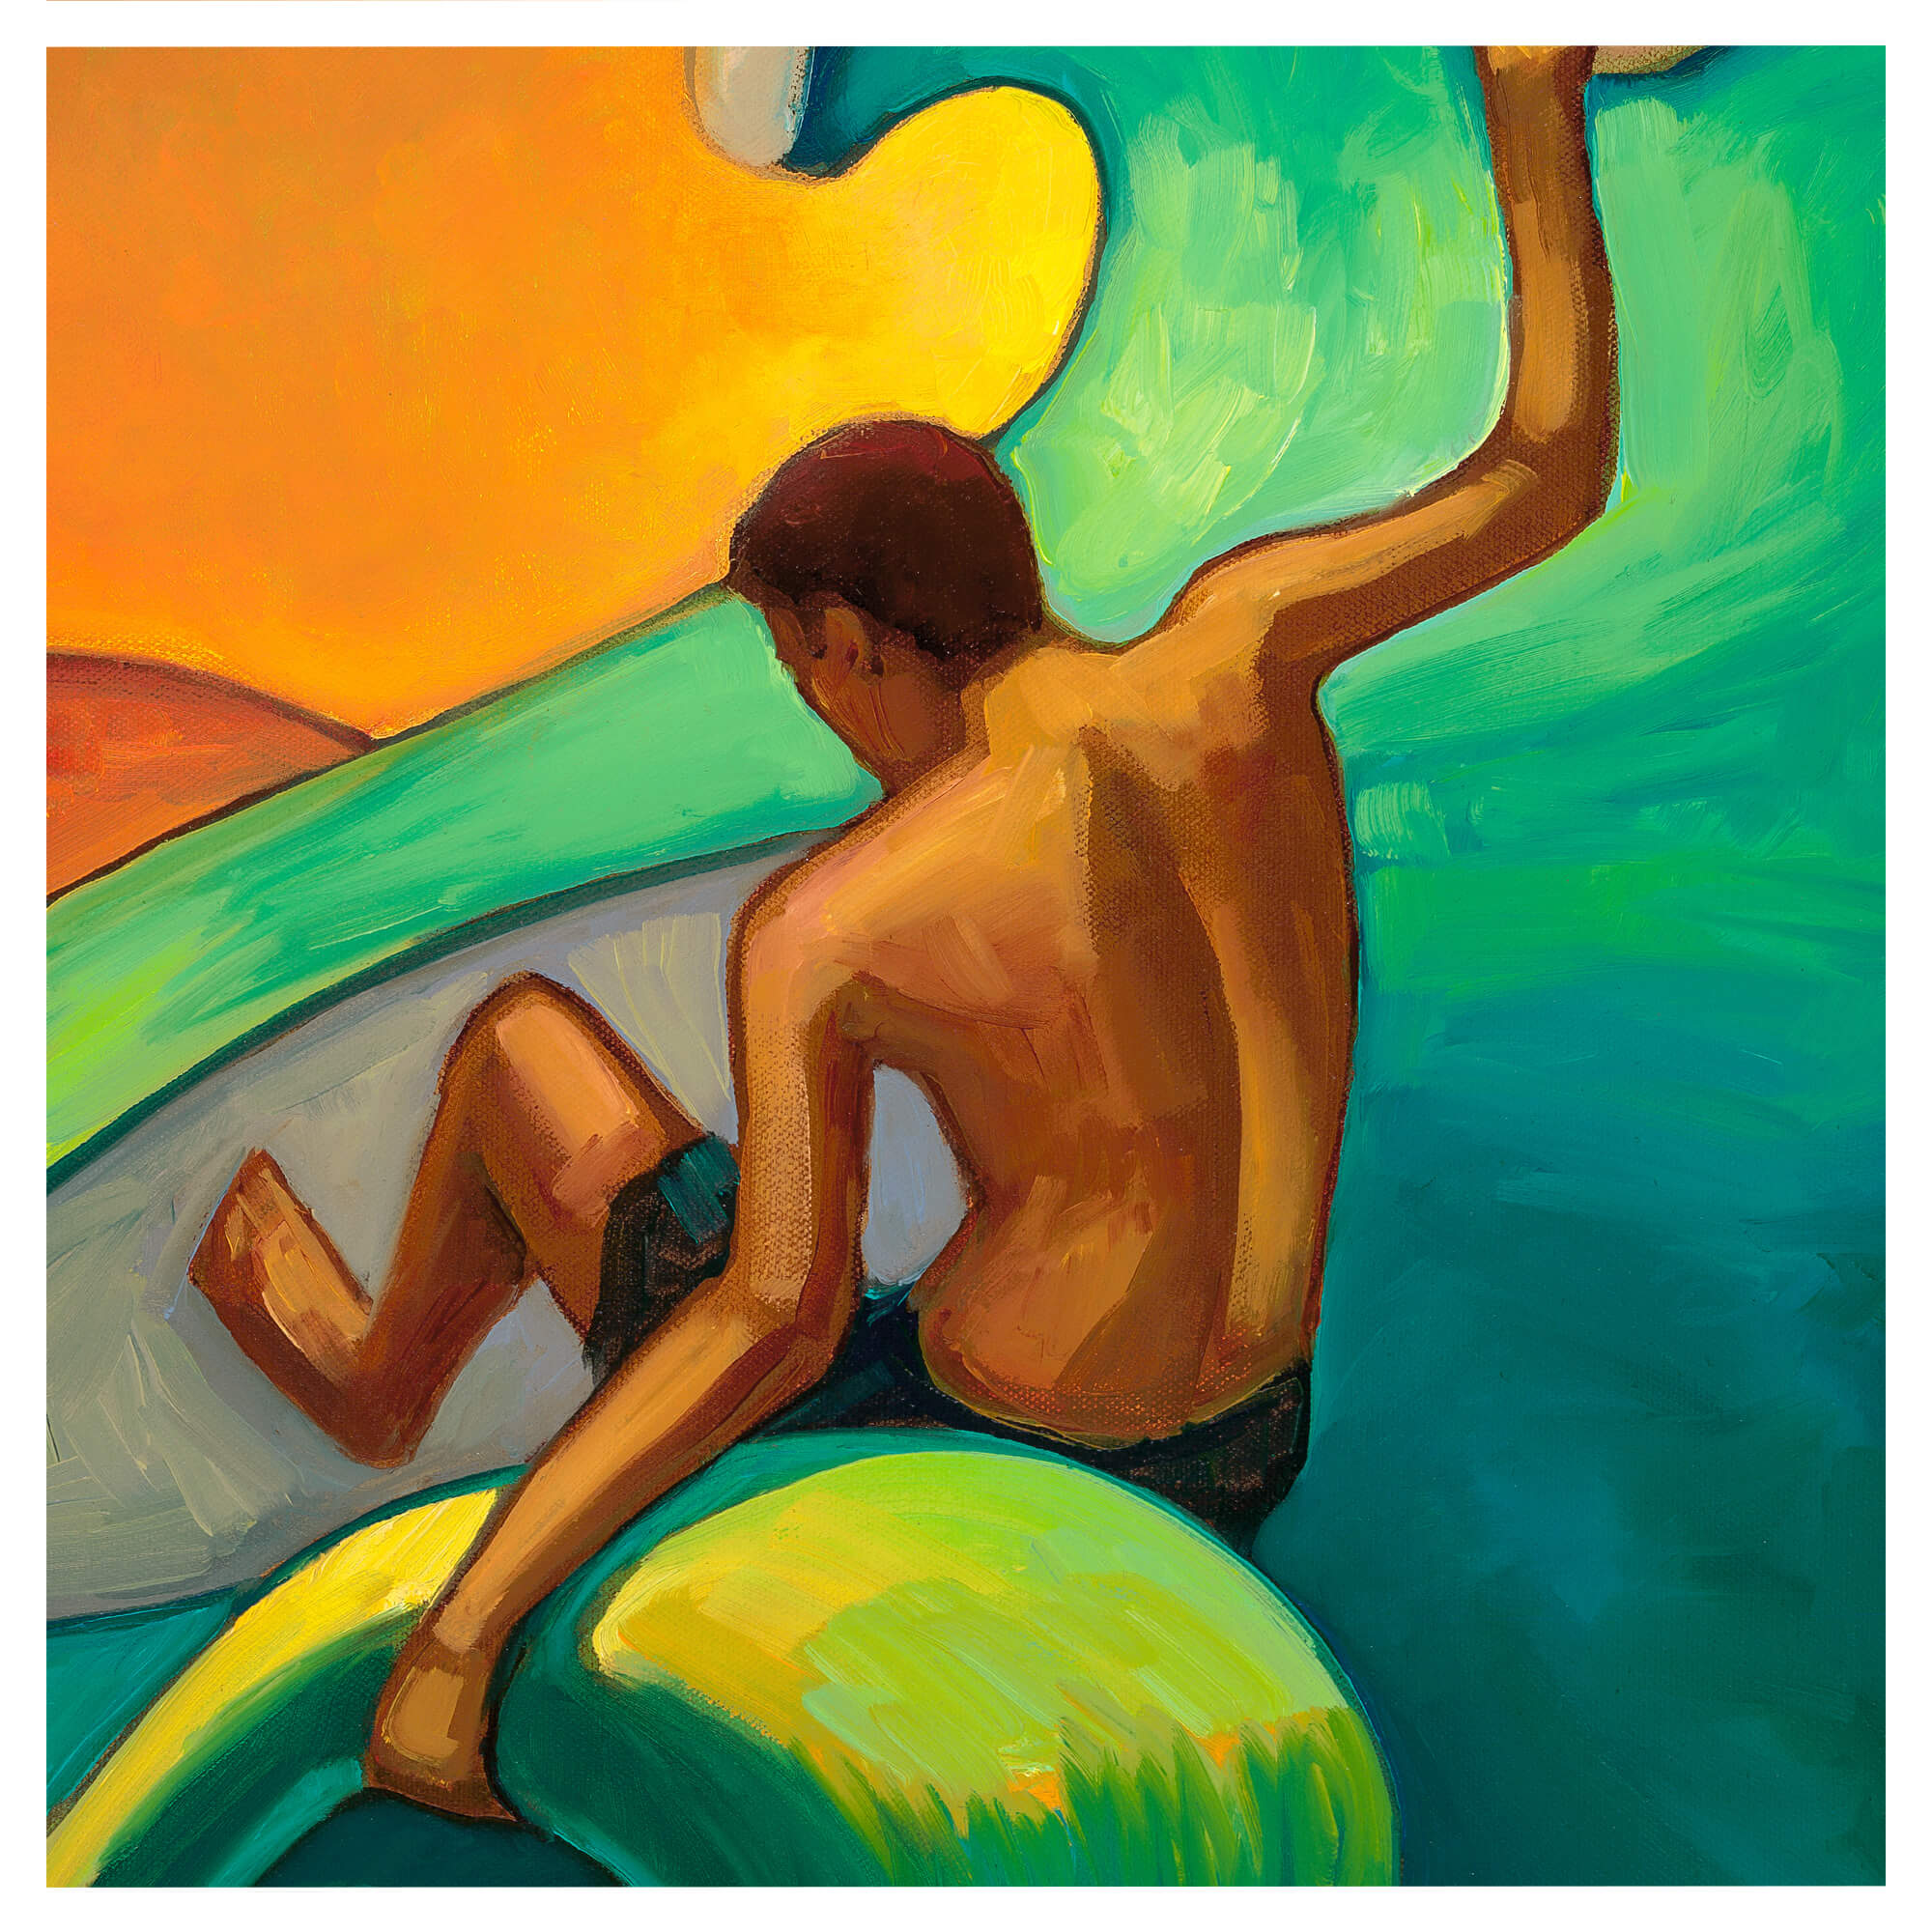 A man trying to adjust the waves by Hawaii artist Colin Redican